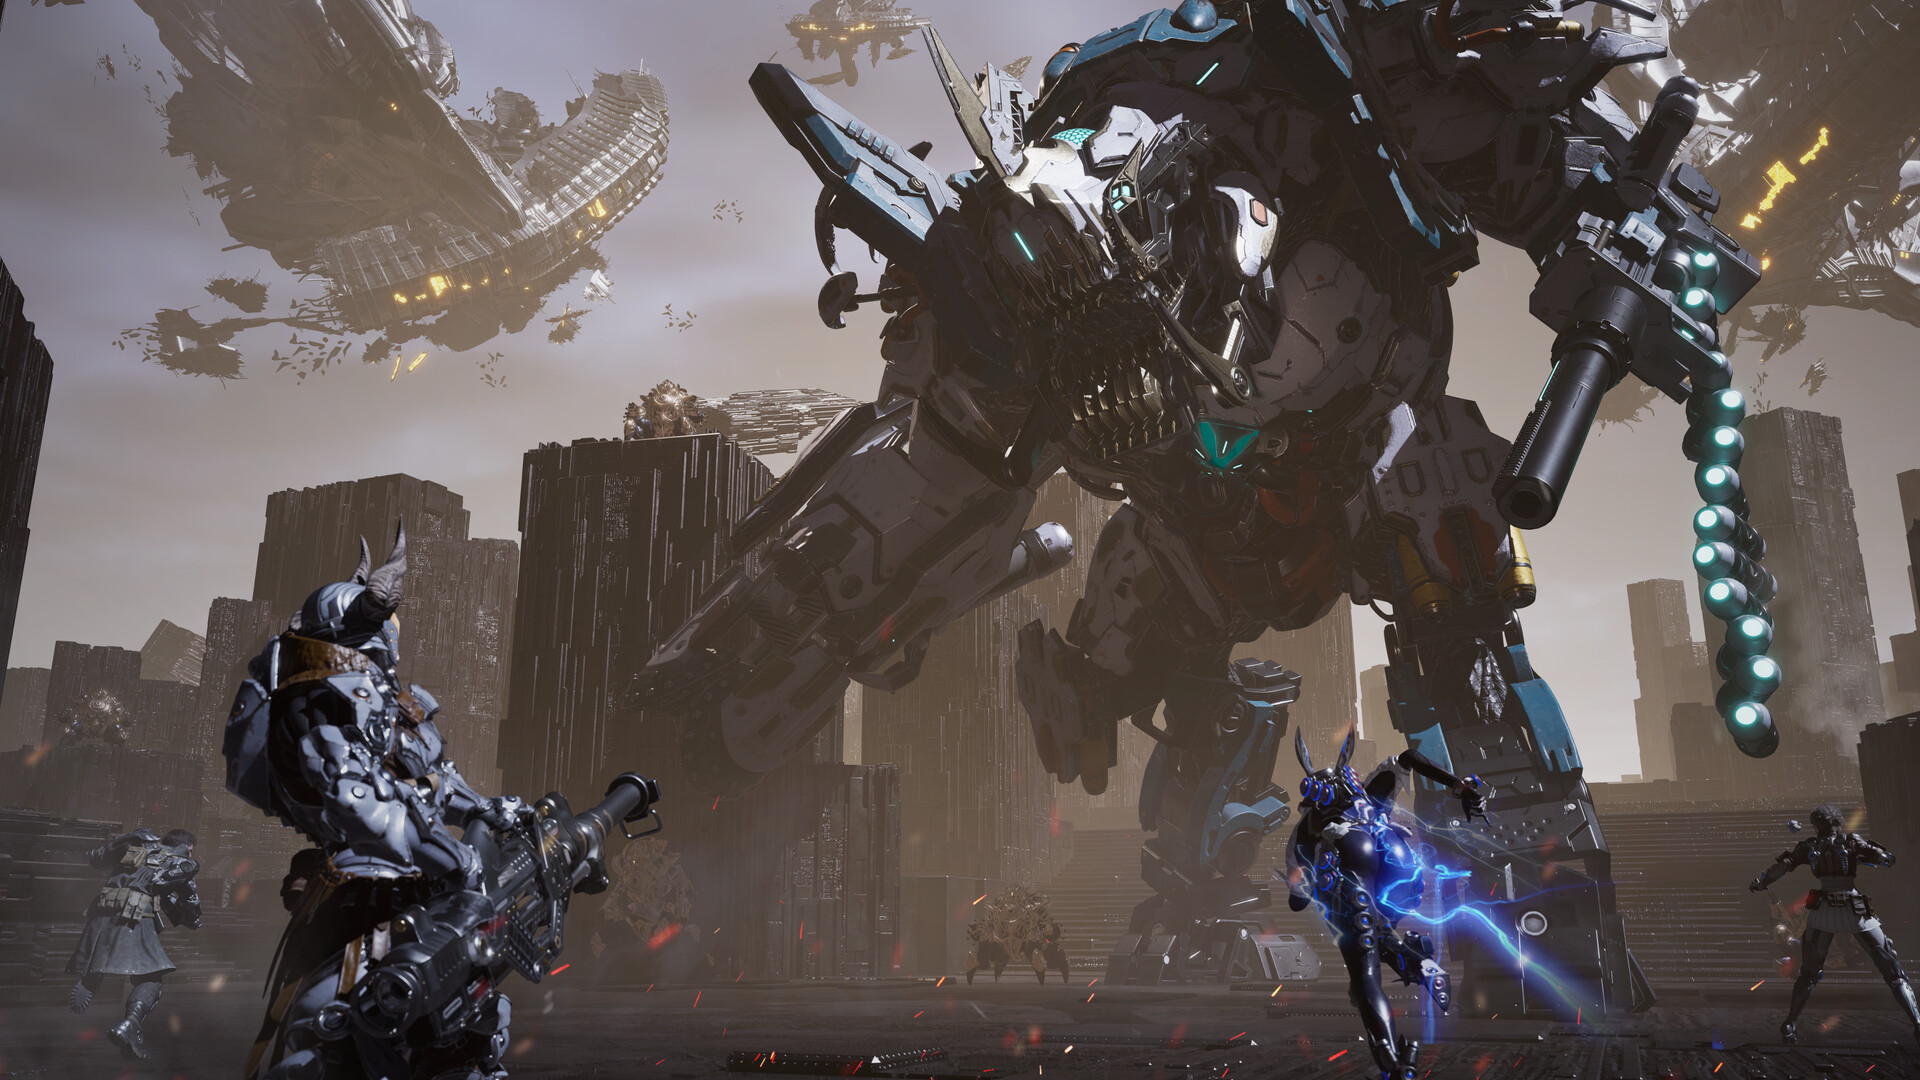 A man with a gun fights a robot in The First Descendant.